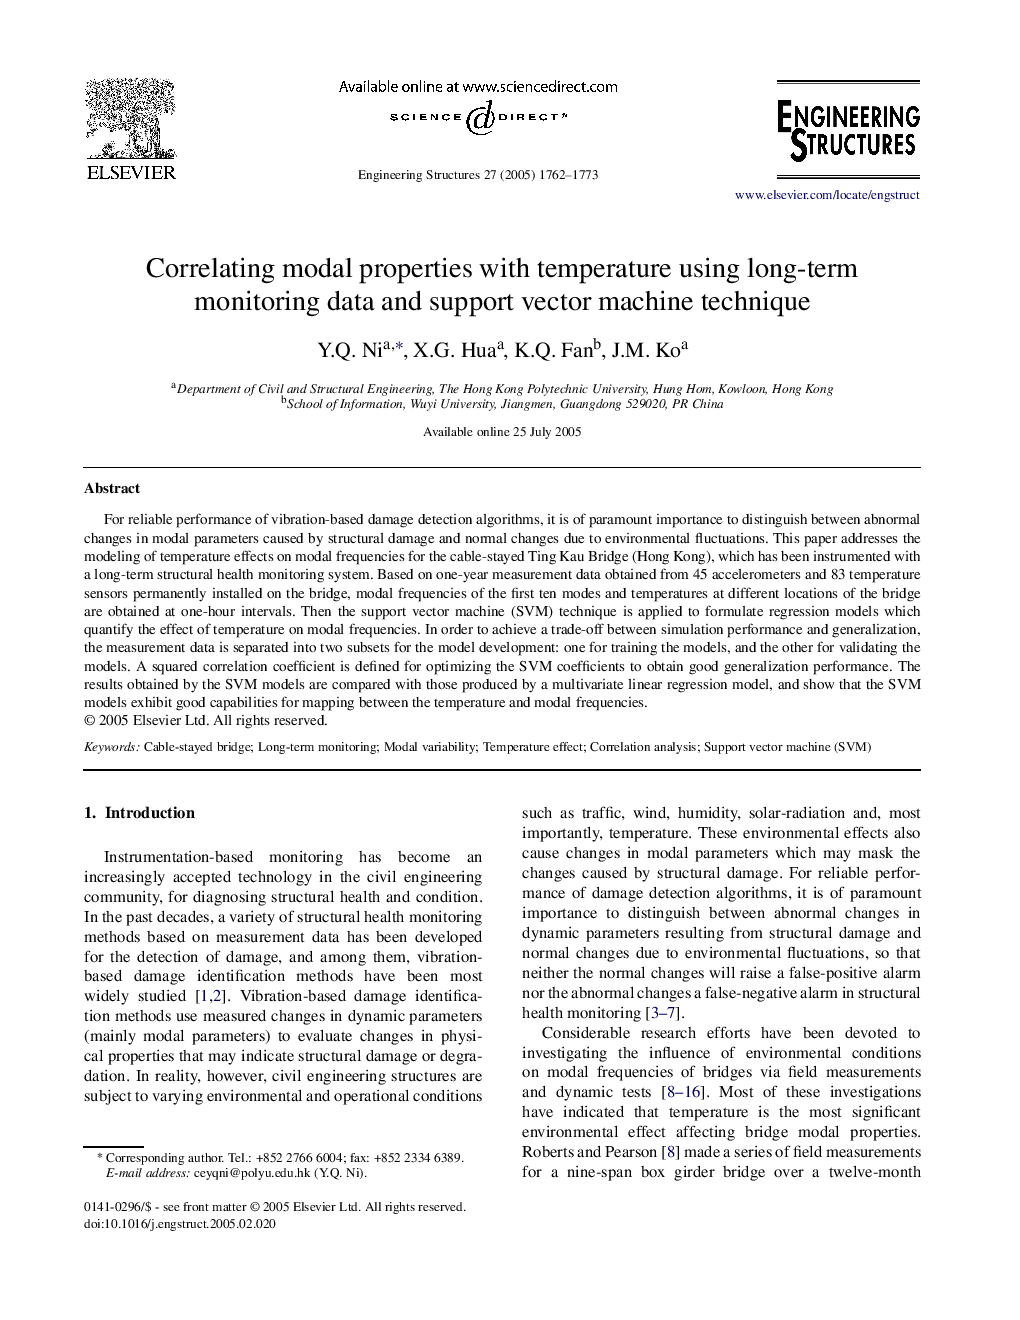 Correlating modal properties with temperature using long-term monitoring data and support vector machine technique